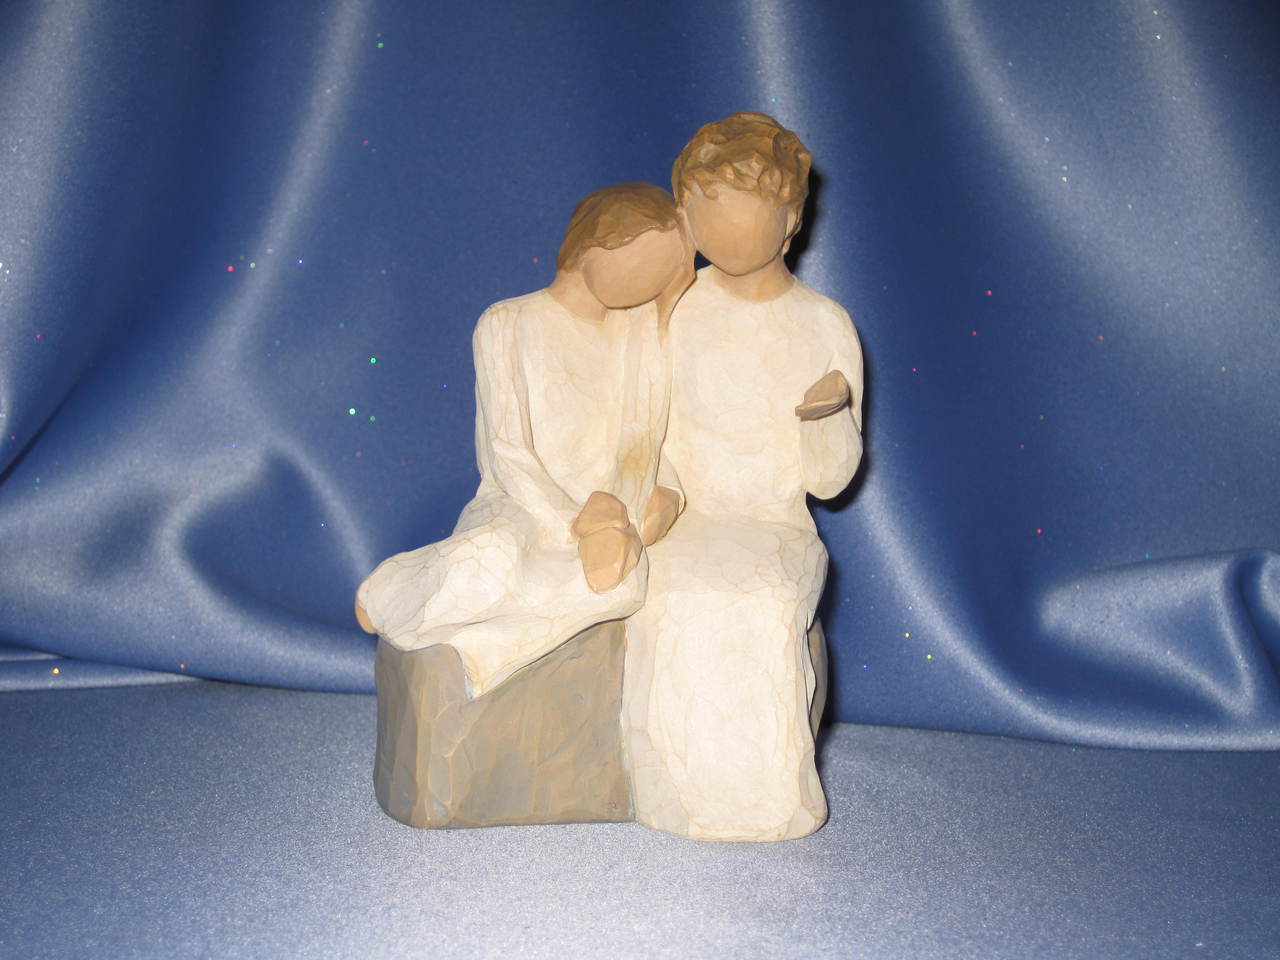 Primary image for Willow Tree "With my Grandmother" Figurine.